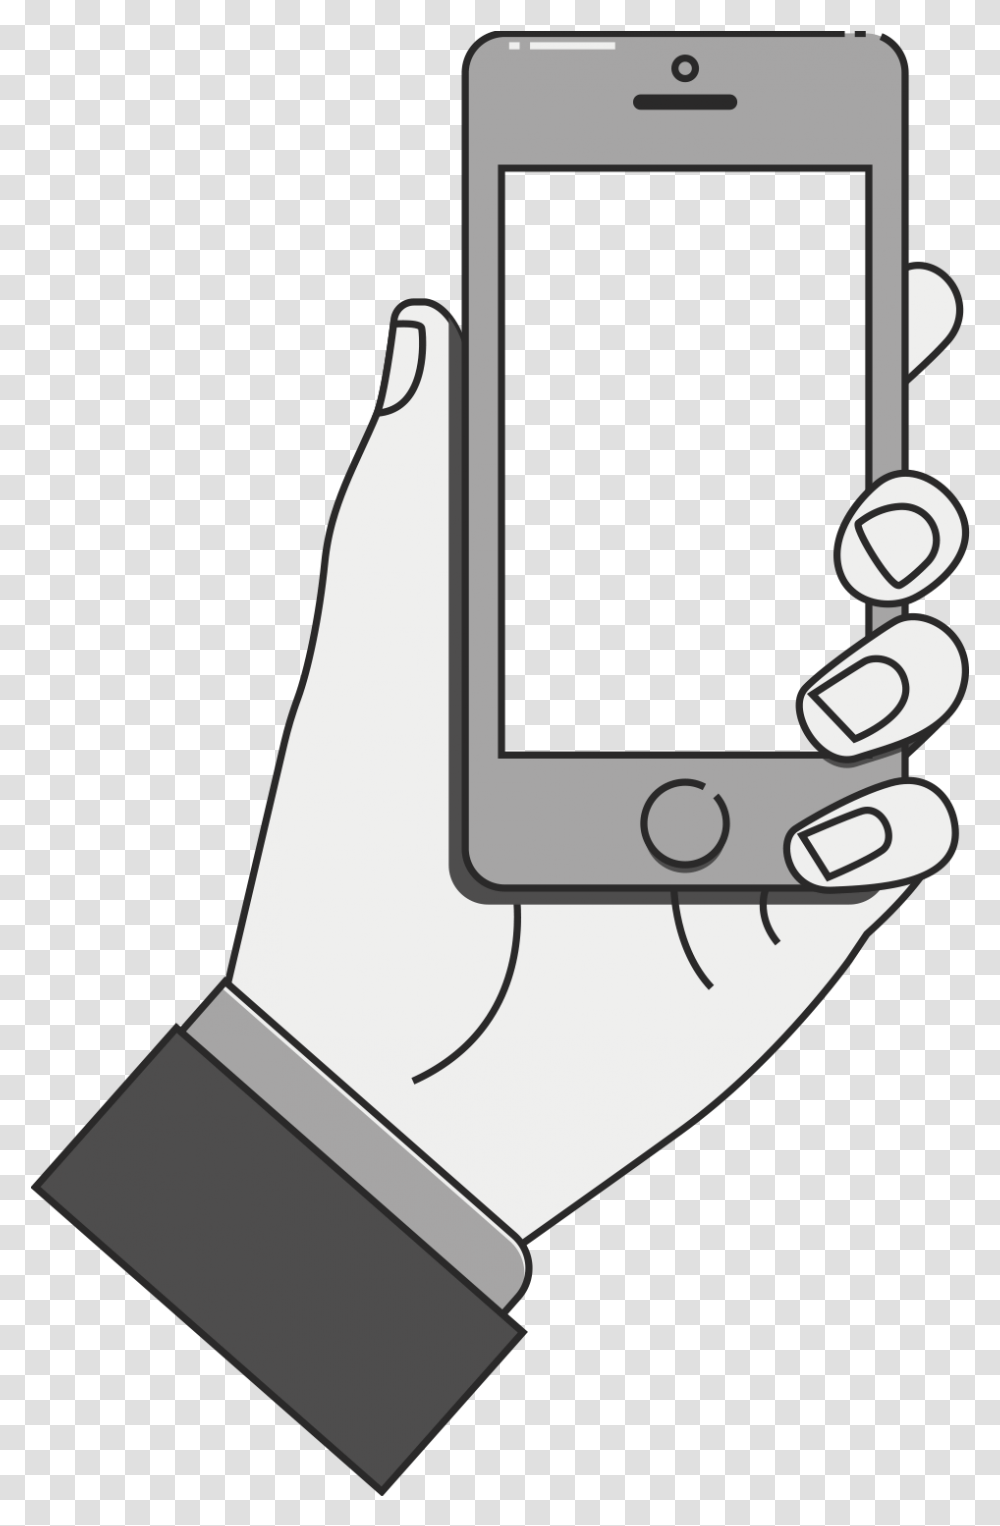 An Illustration Of A Hand Holding A Phone Displaying, Electronics, Mobile Phone, Cell Phone, Iphone Transparent Png